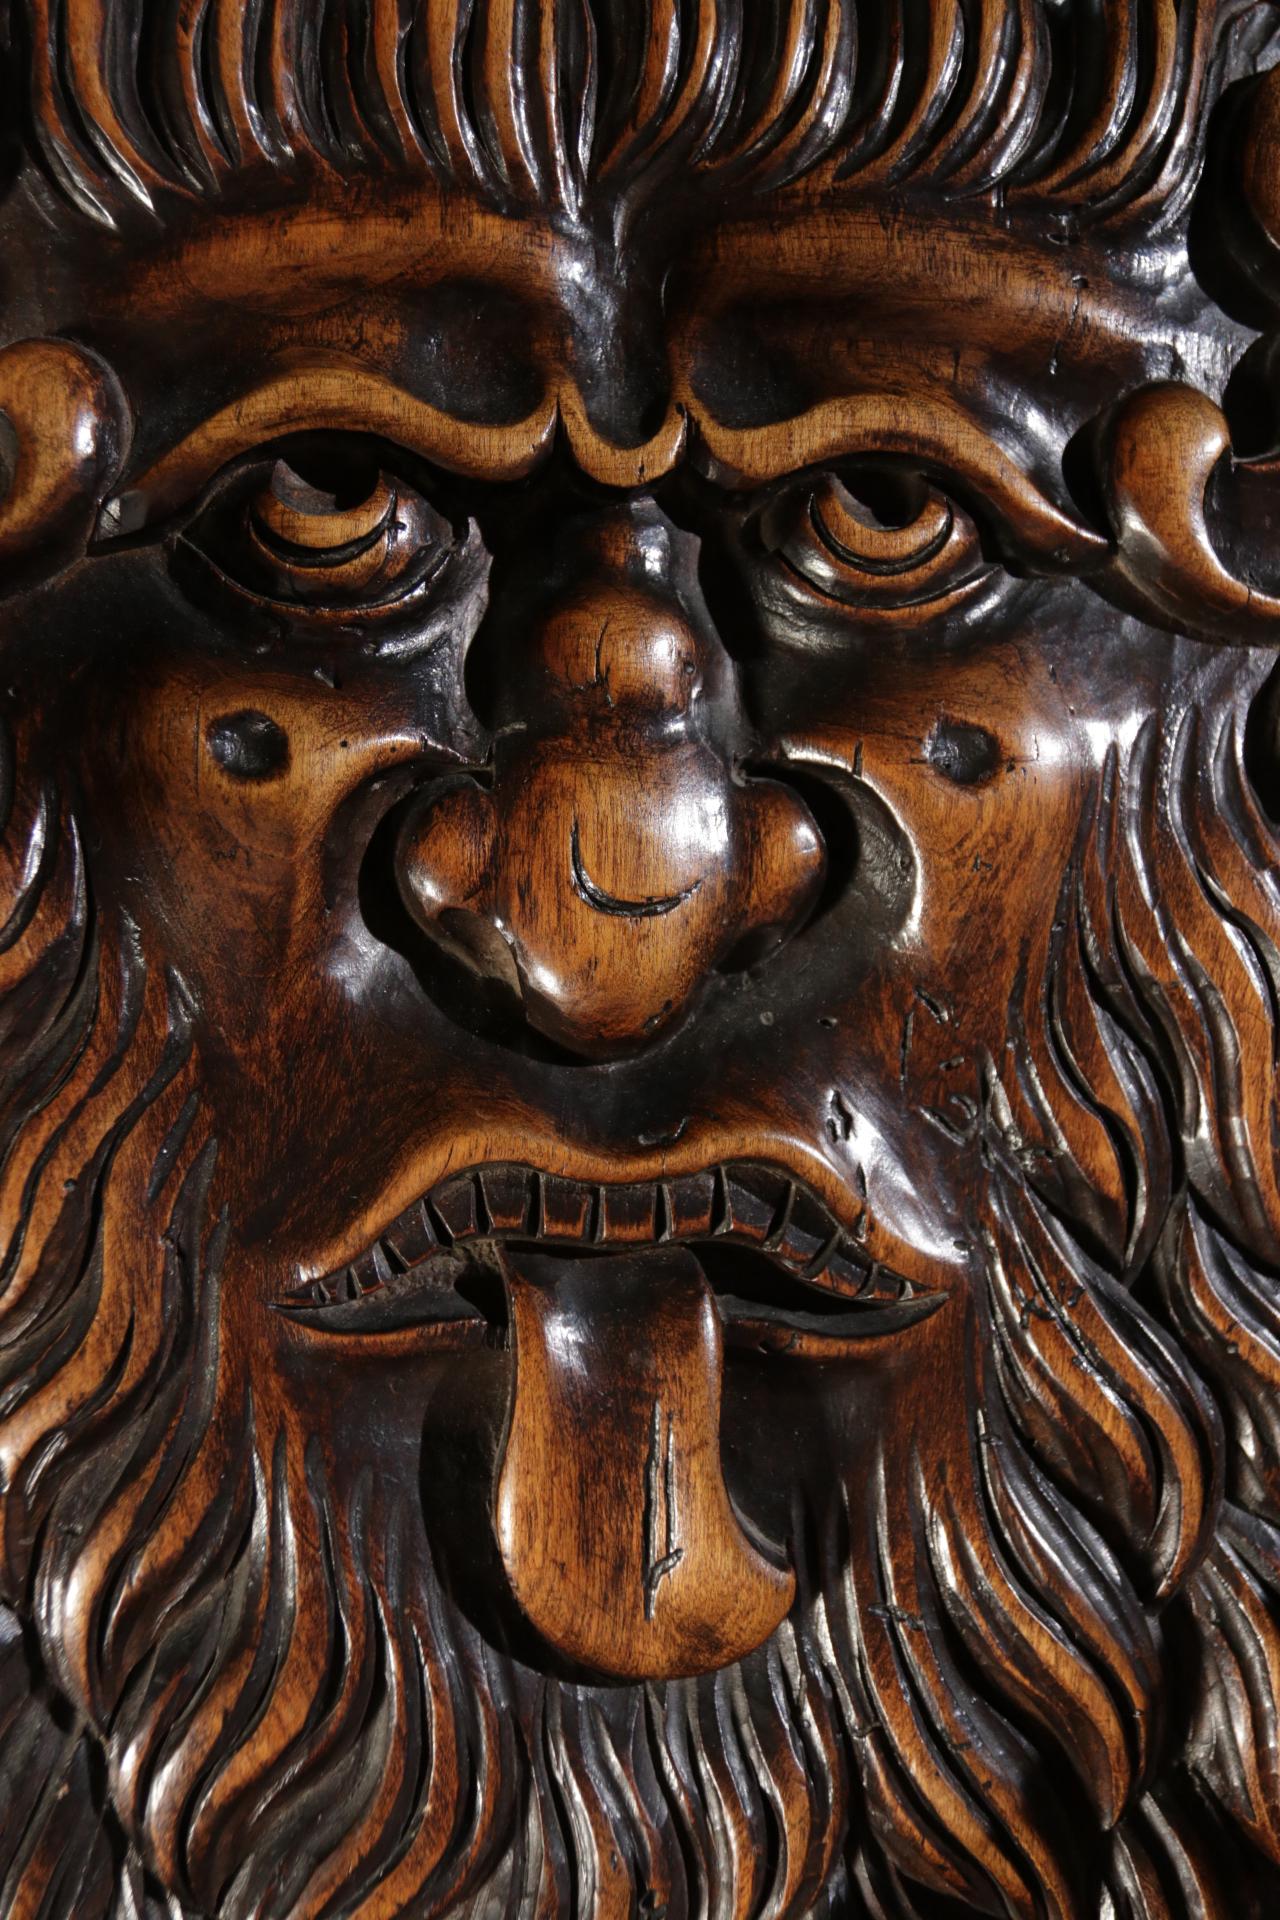 Beautiful 17th century (1650-1680) Sgabello.
The countries where this could originate are located in and around the Alps. So Switzerland, Austria, Southern Germany, and Northern Italy.
Made of solid walnut and it has a beautiful color and patina.